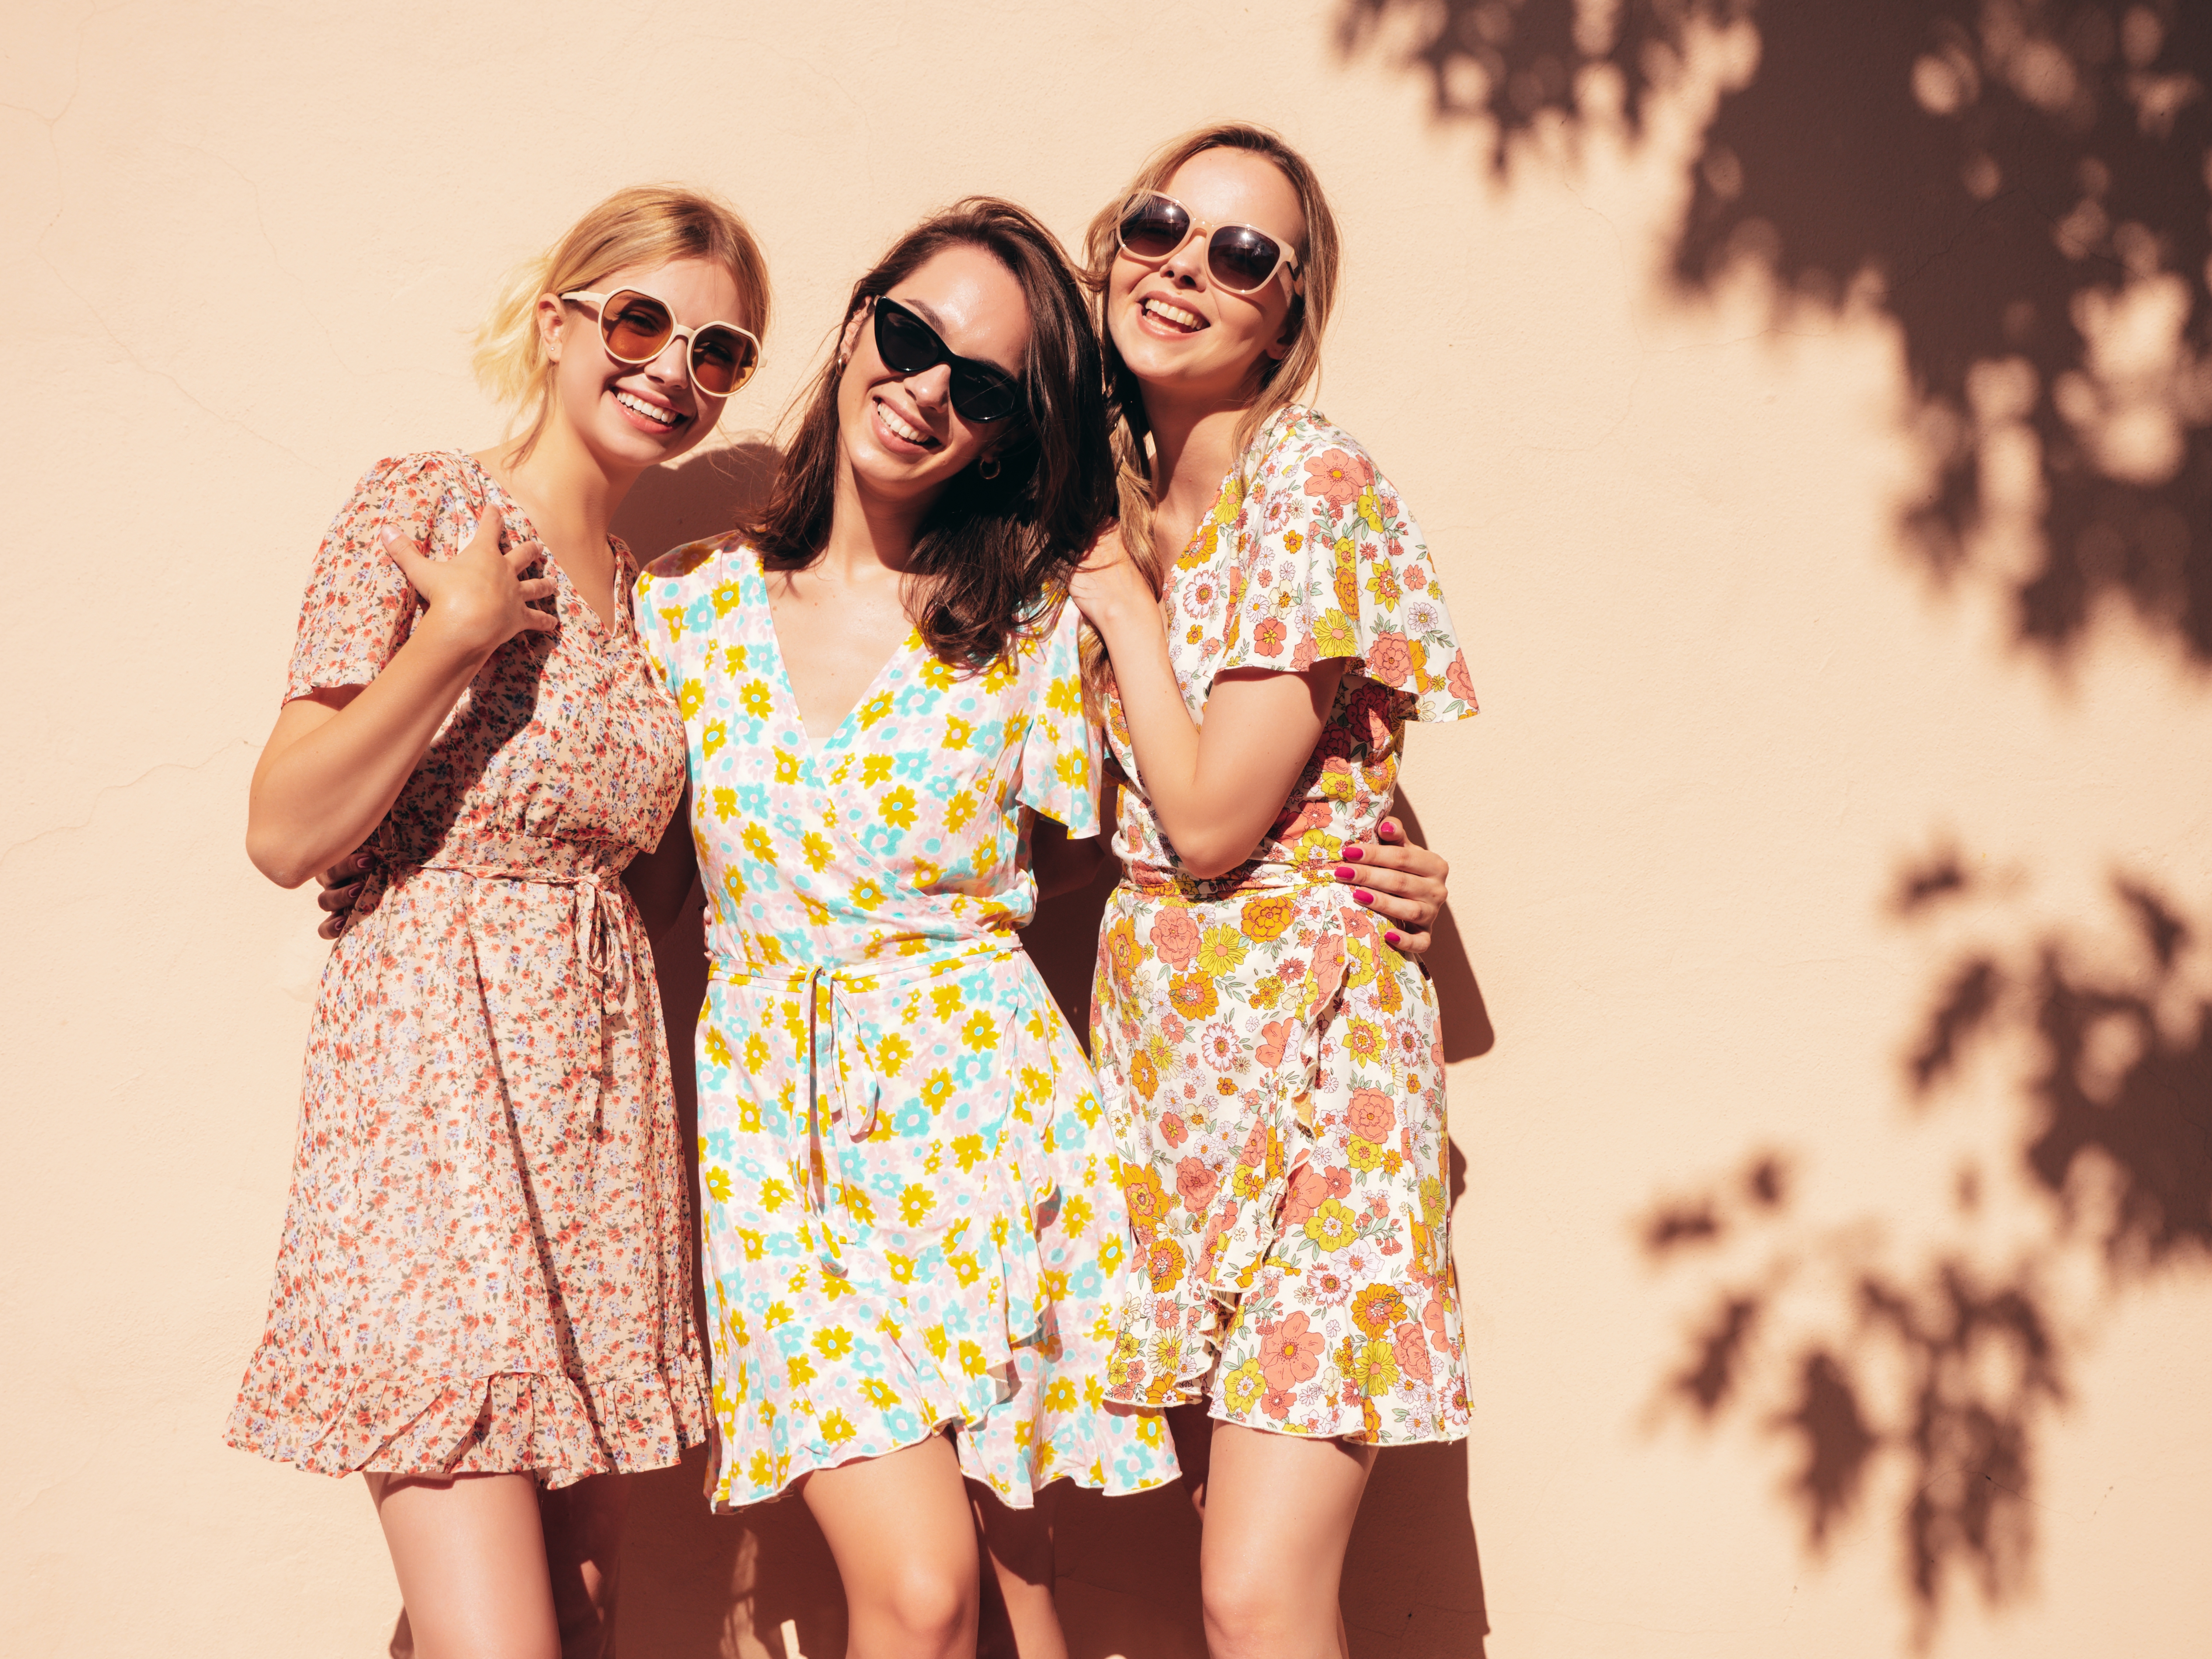 Three sisters posing for a photo | Source: Shutterstock